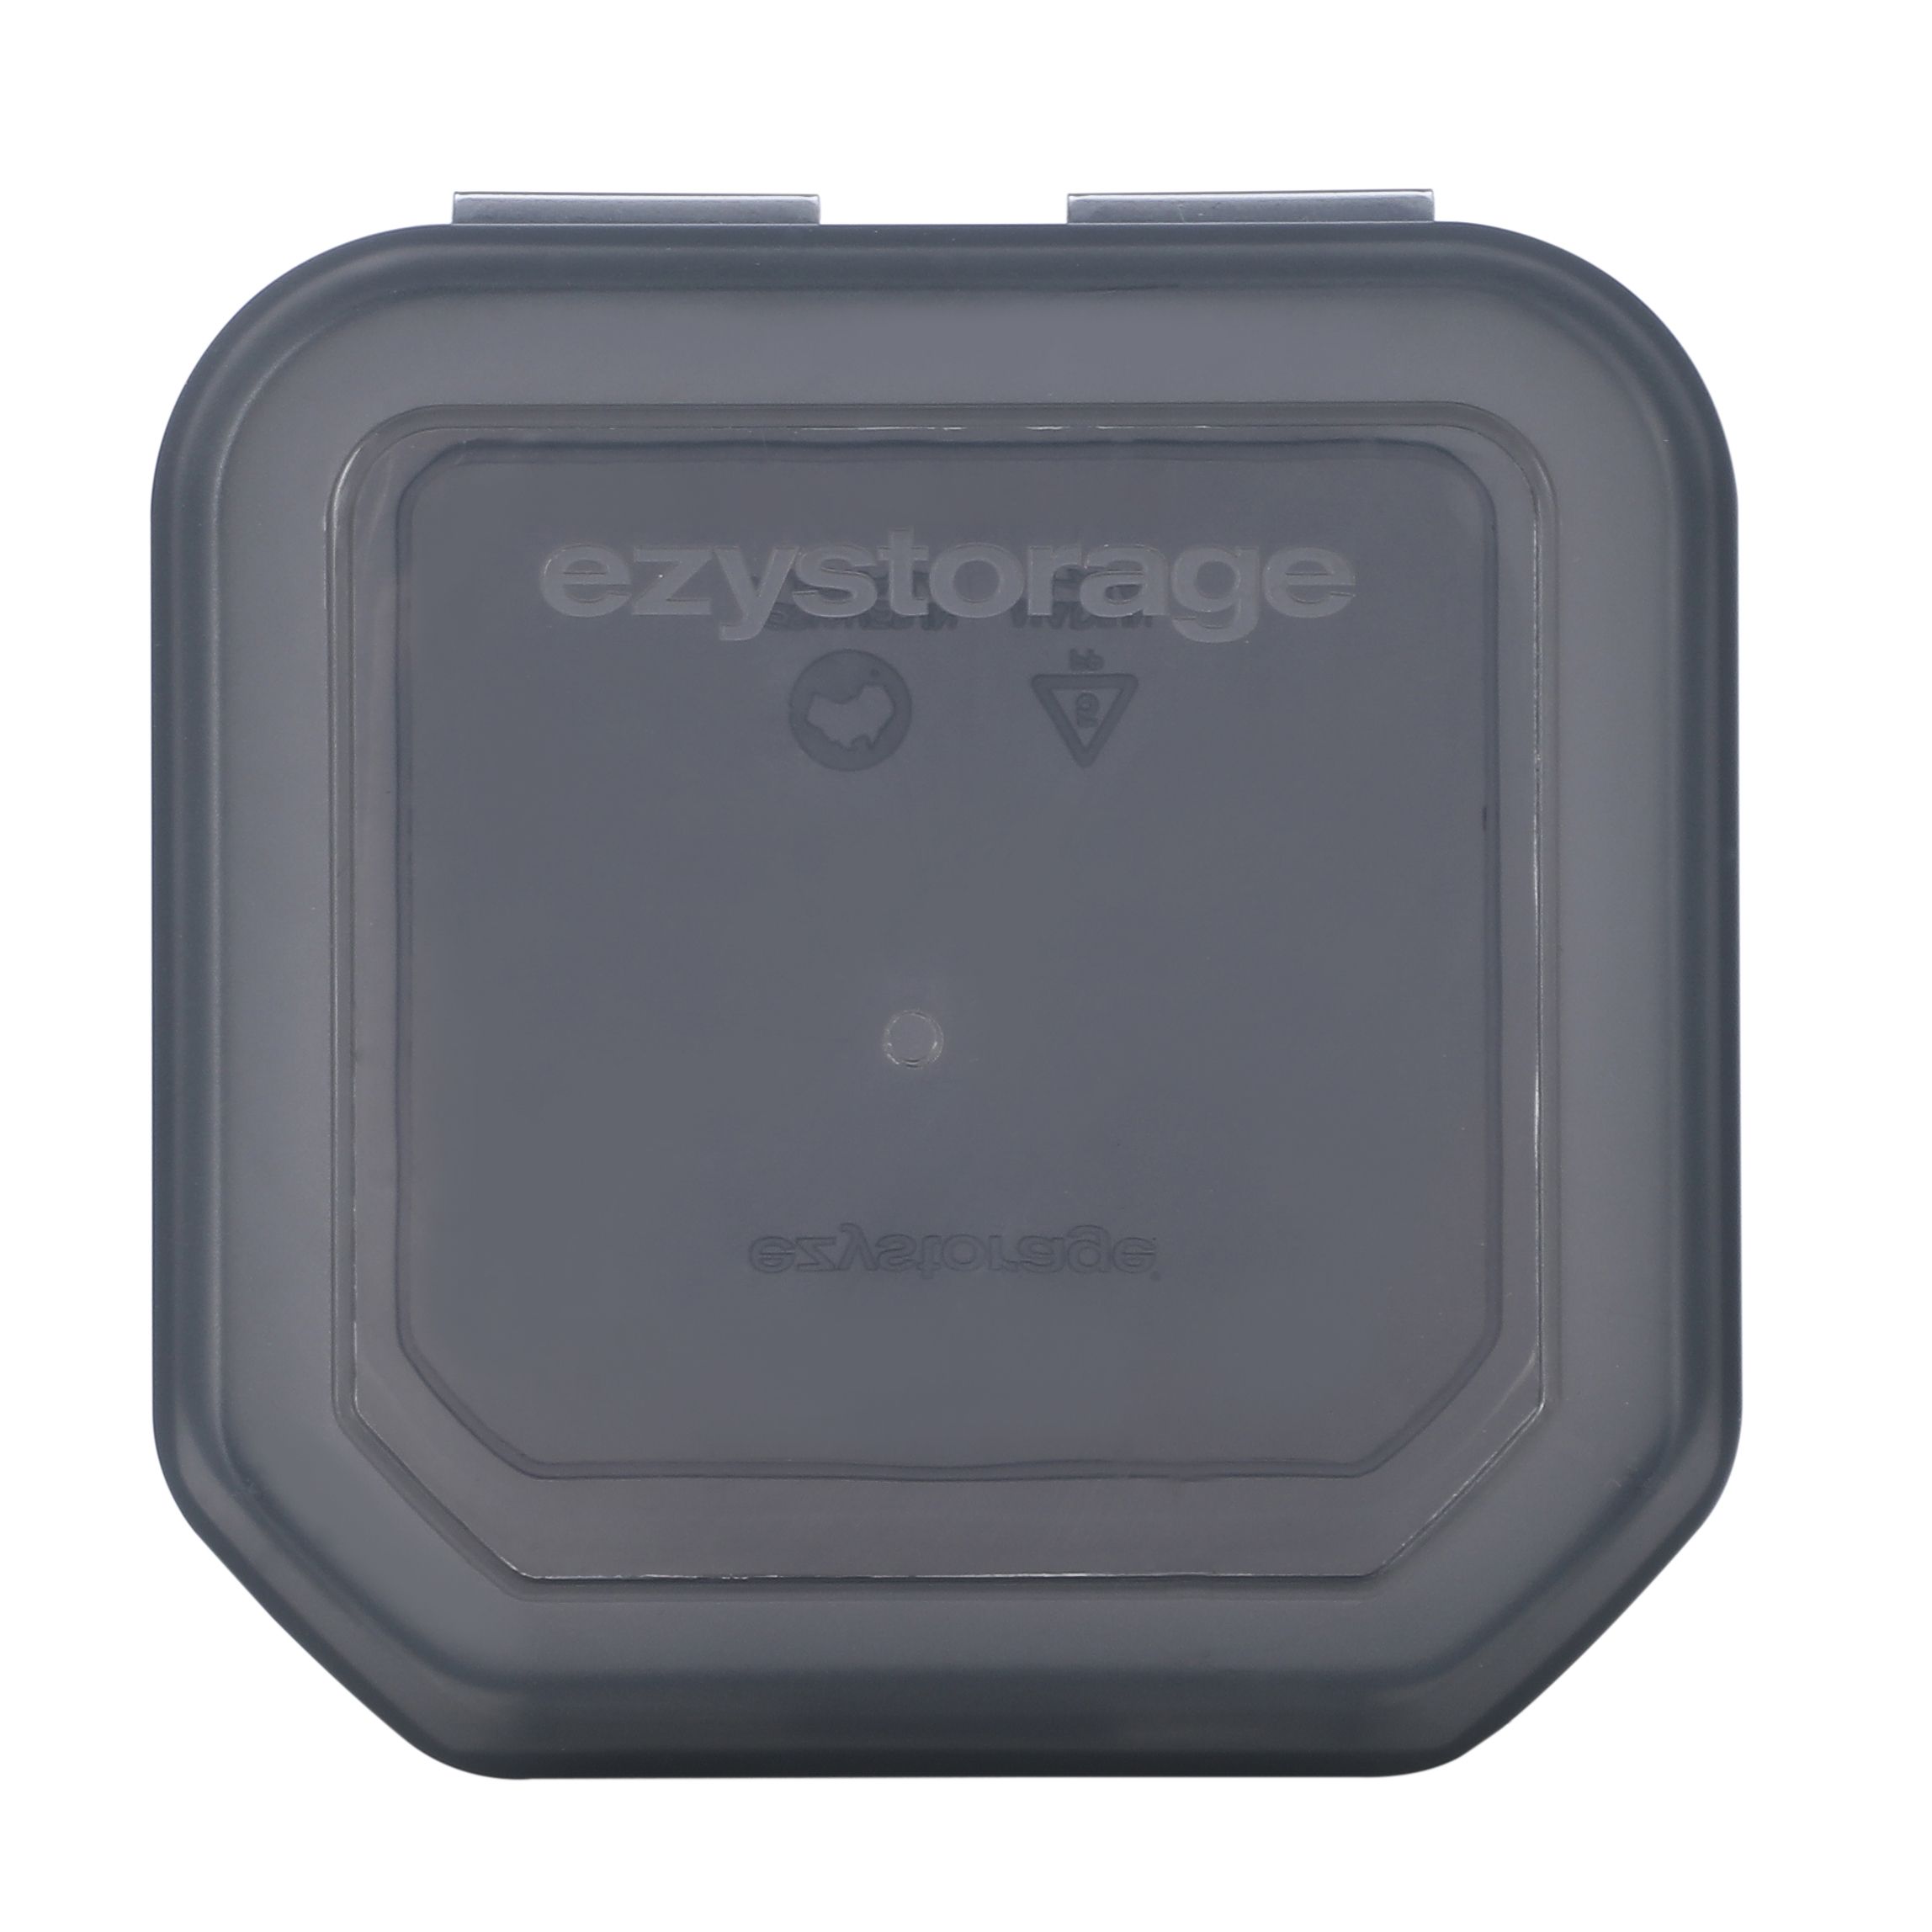 Ezy Storage Bunker tough Clear Organiser with 1 compartment